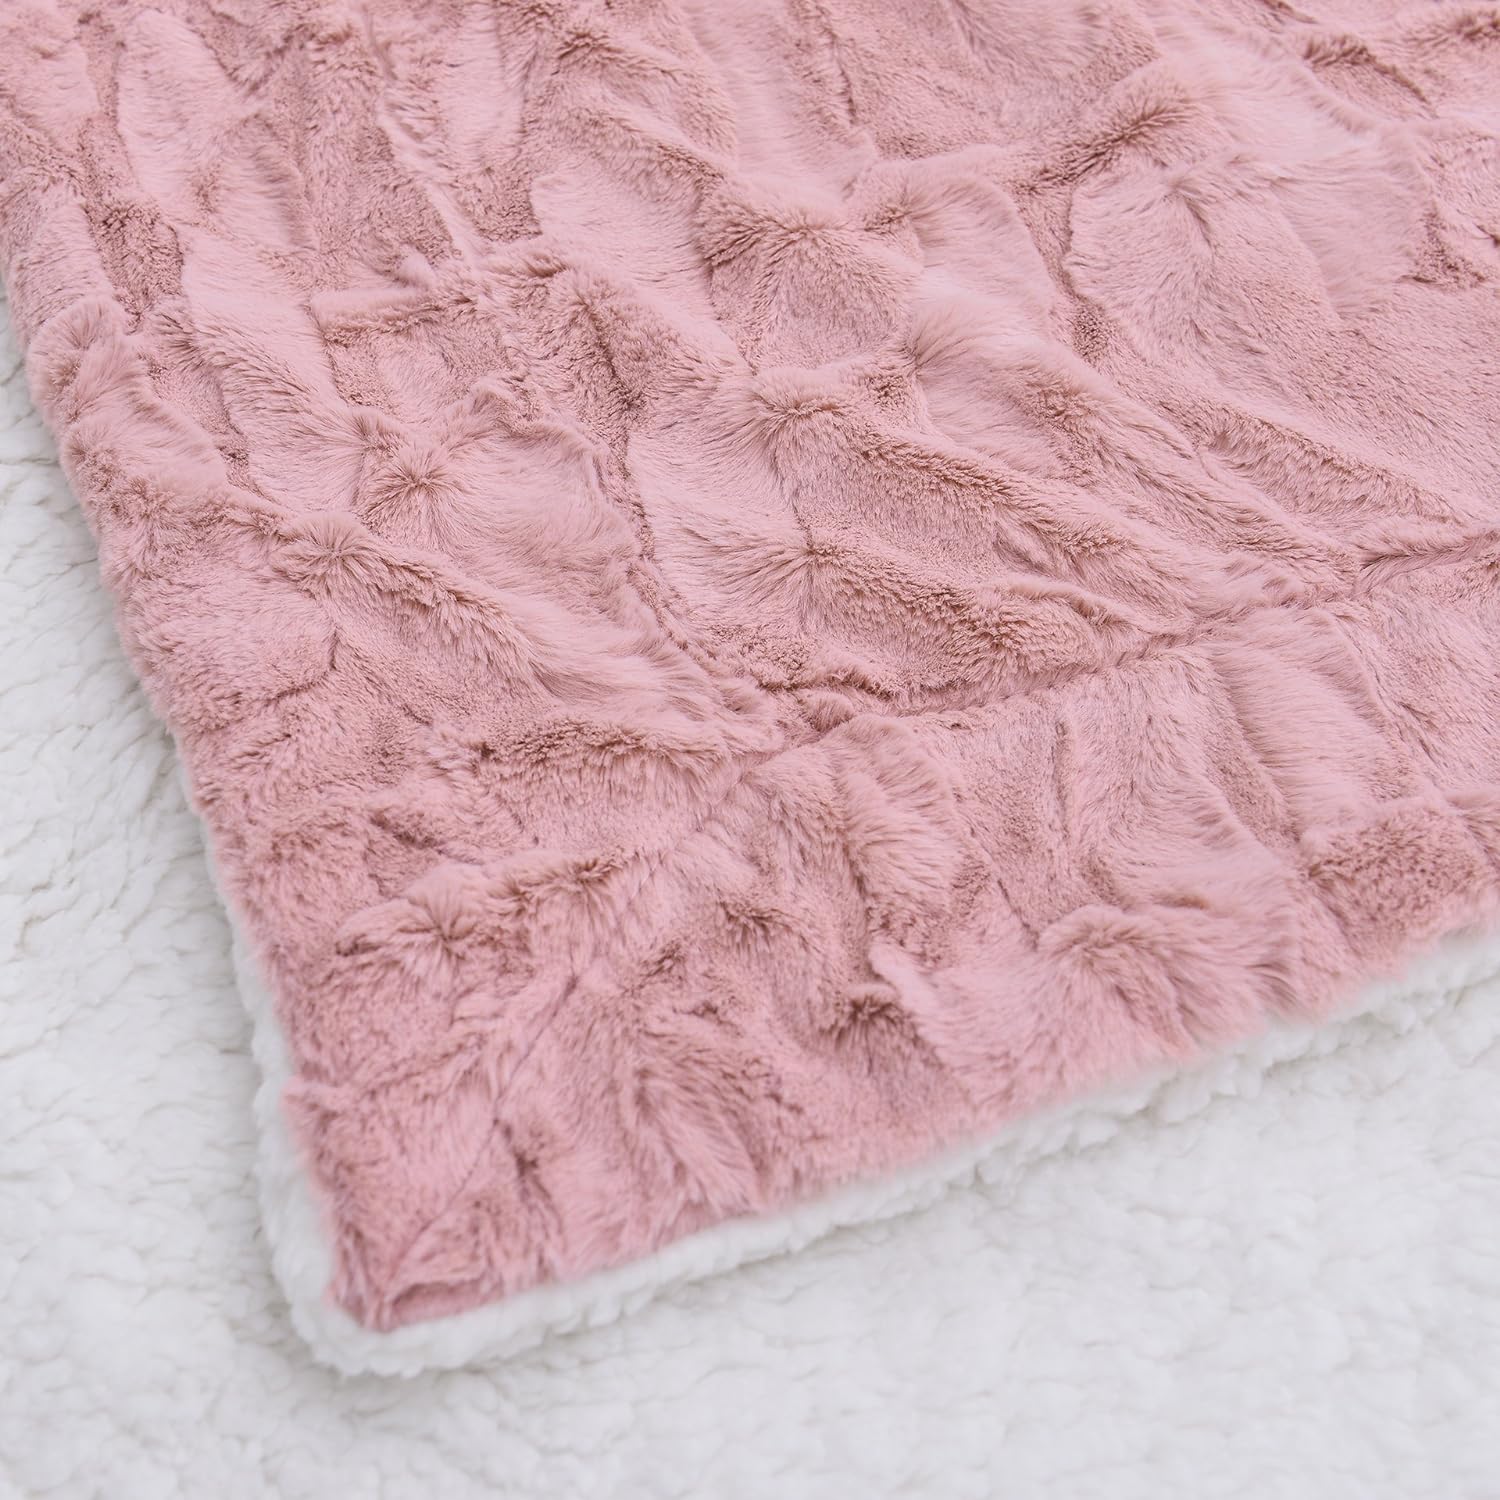 A close-up view of a soft pink blanket with a slightly darker pink satin border. The blanket is wrinkled and appears to be lying on a bed.